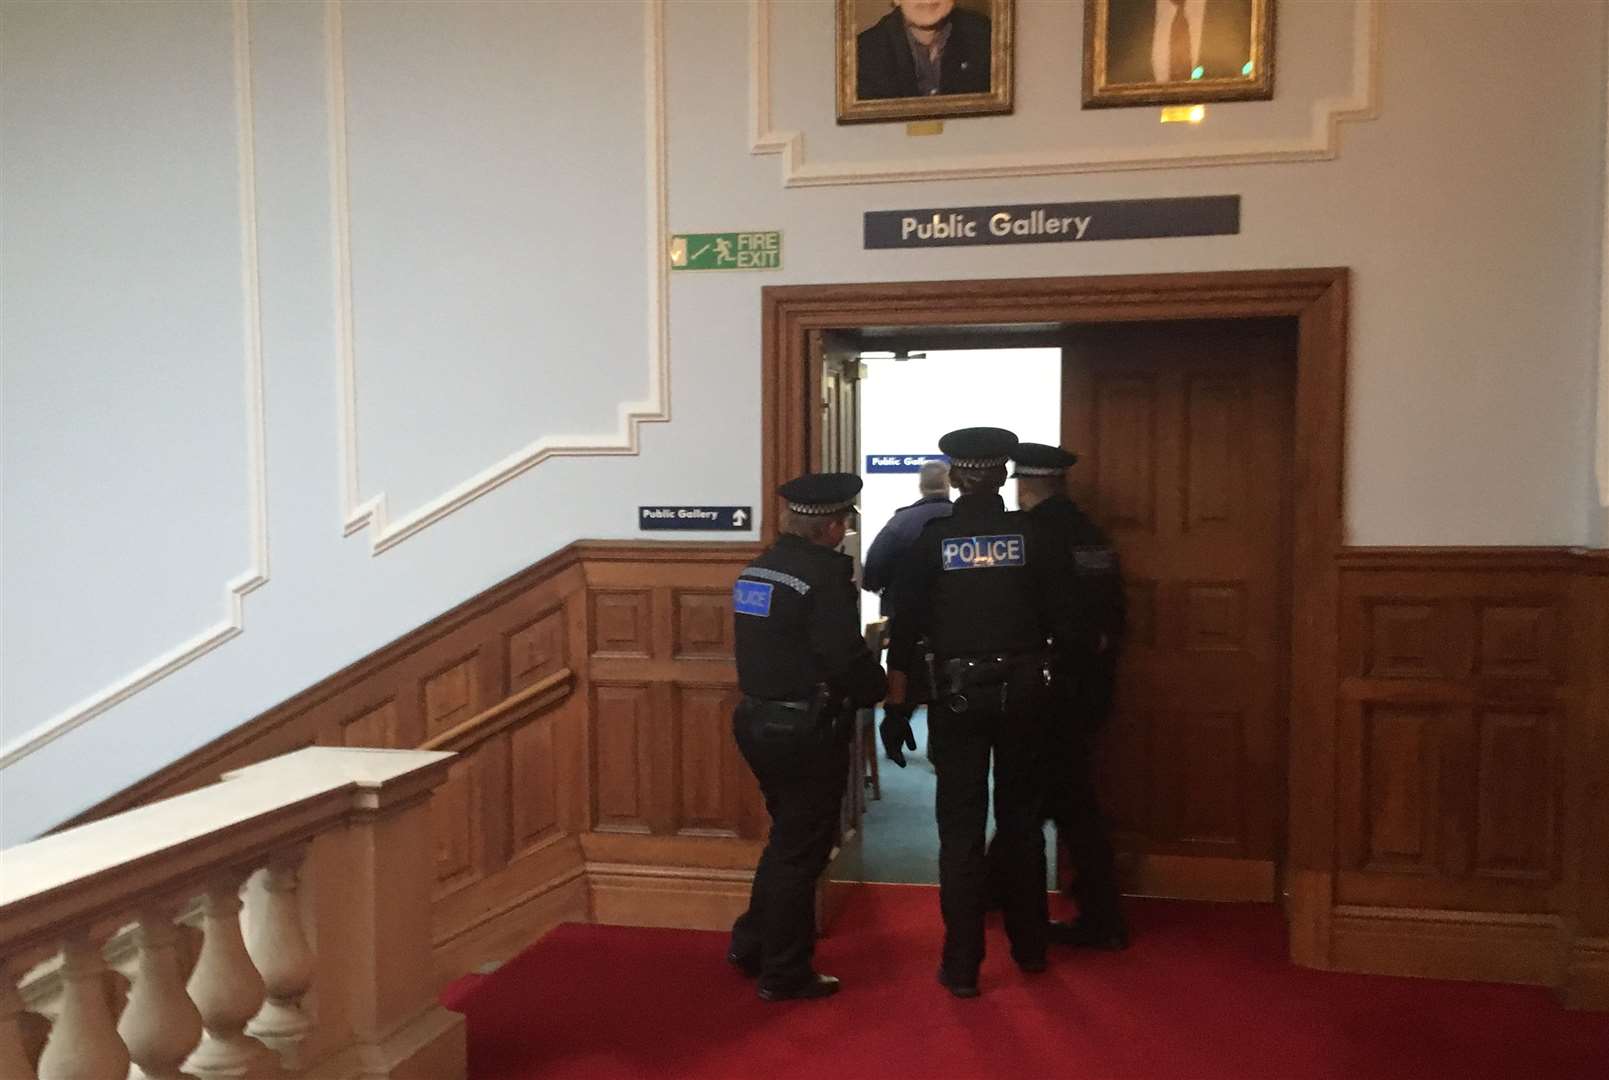 Police were seen entering the council chambers